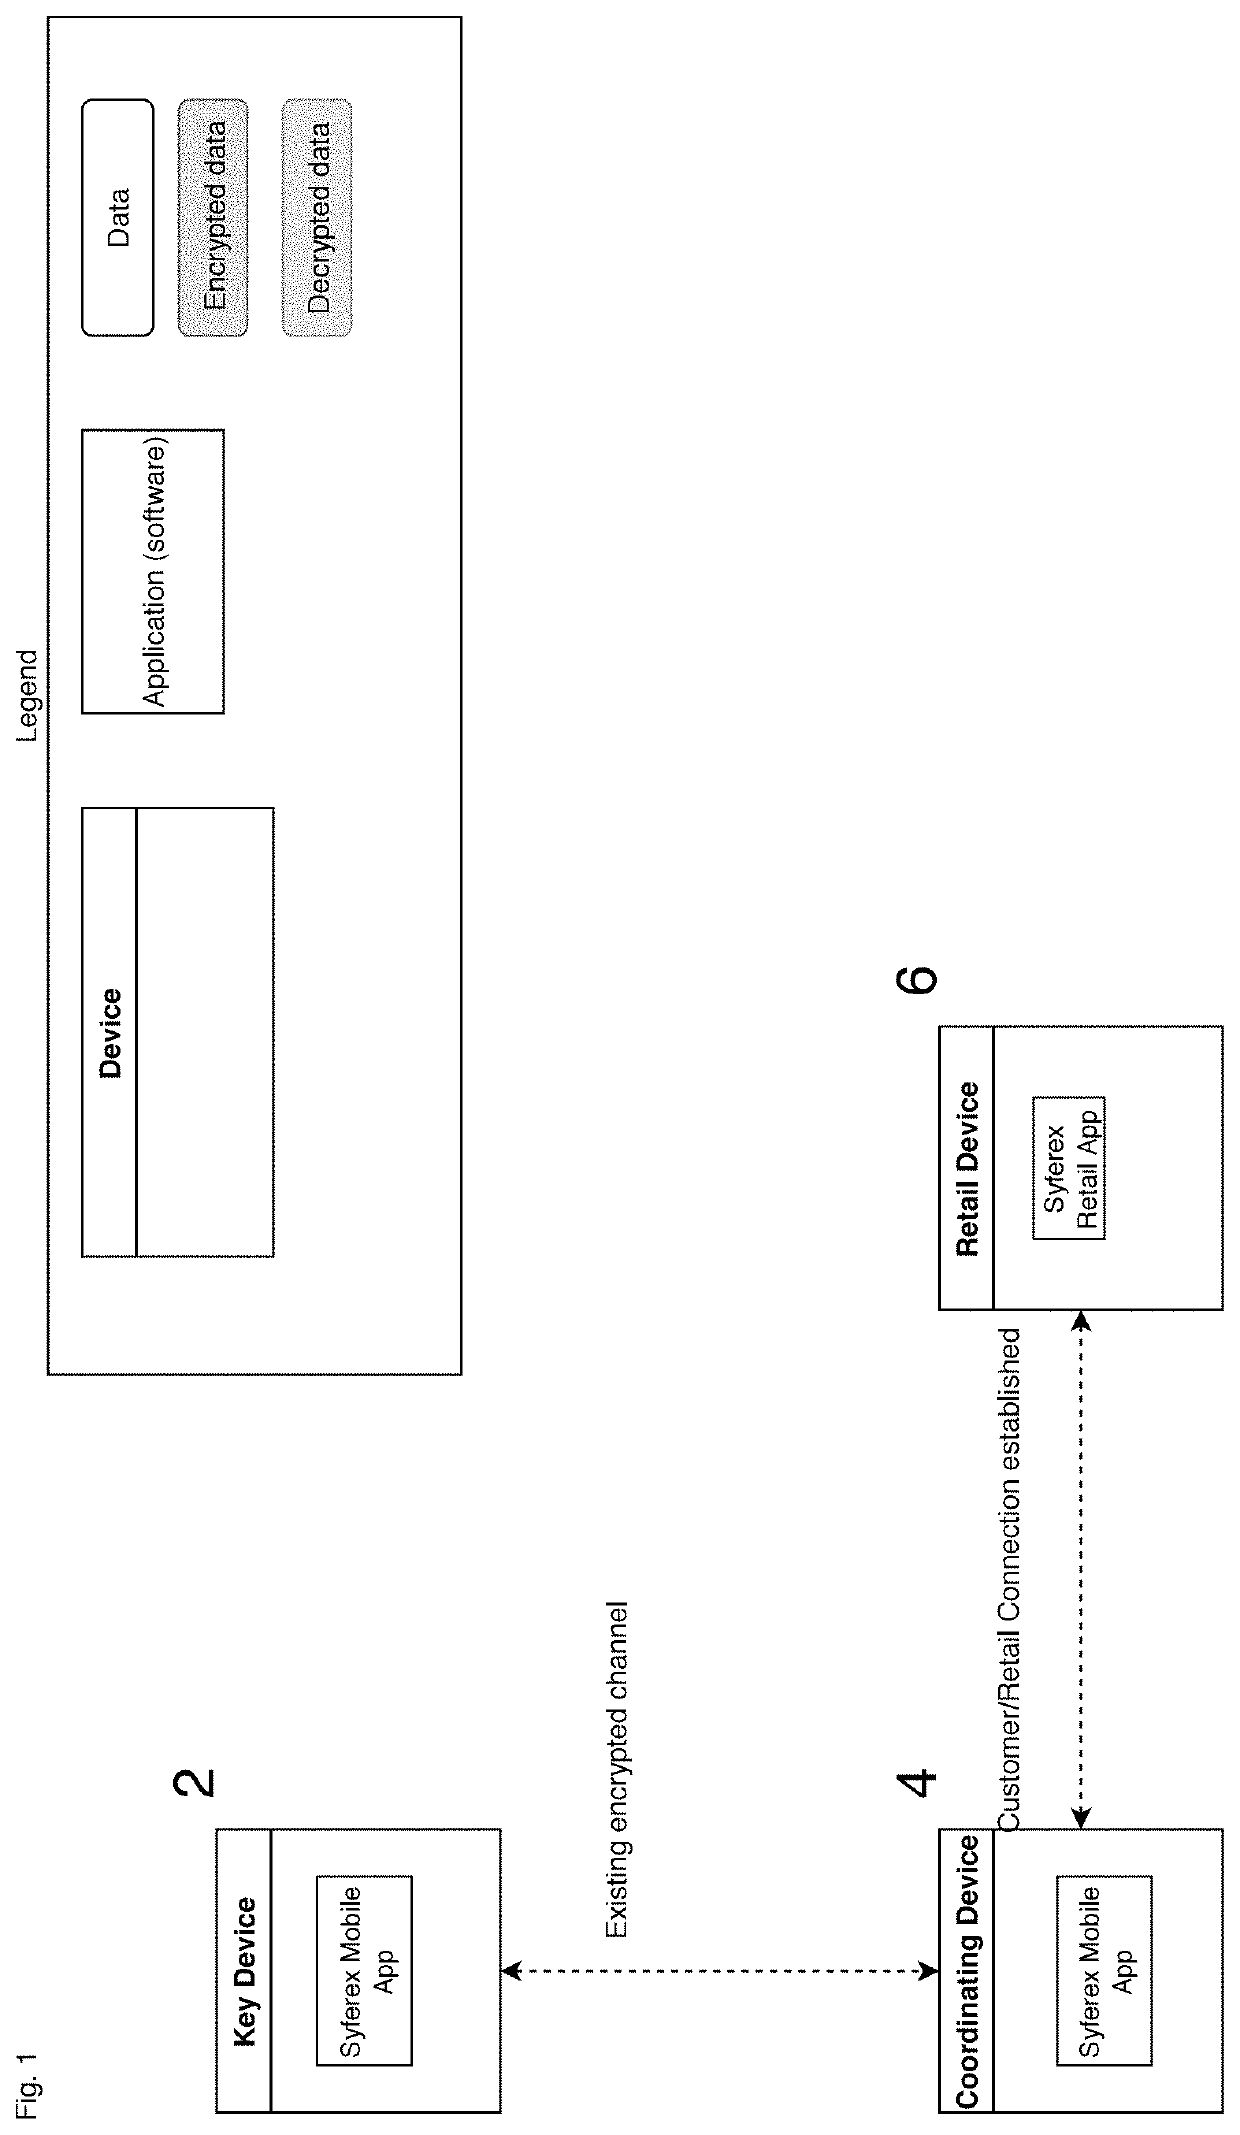 Authentication system using paired, role reversing personal devices